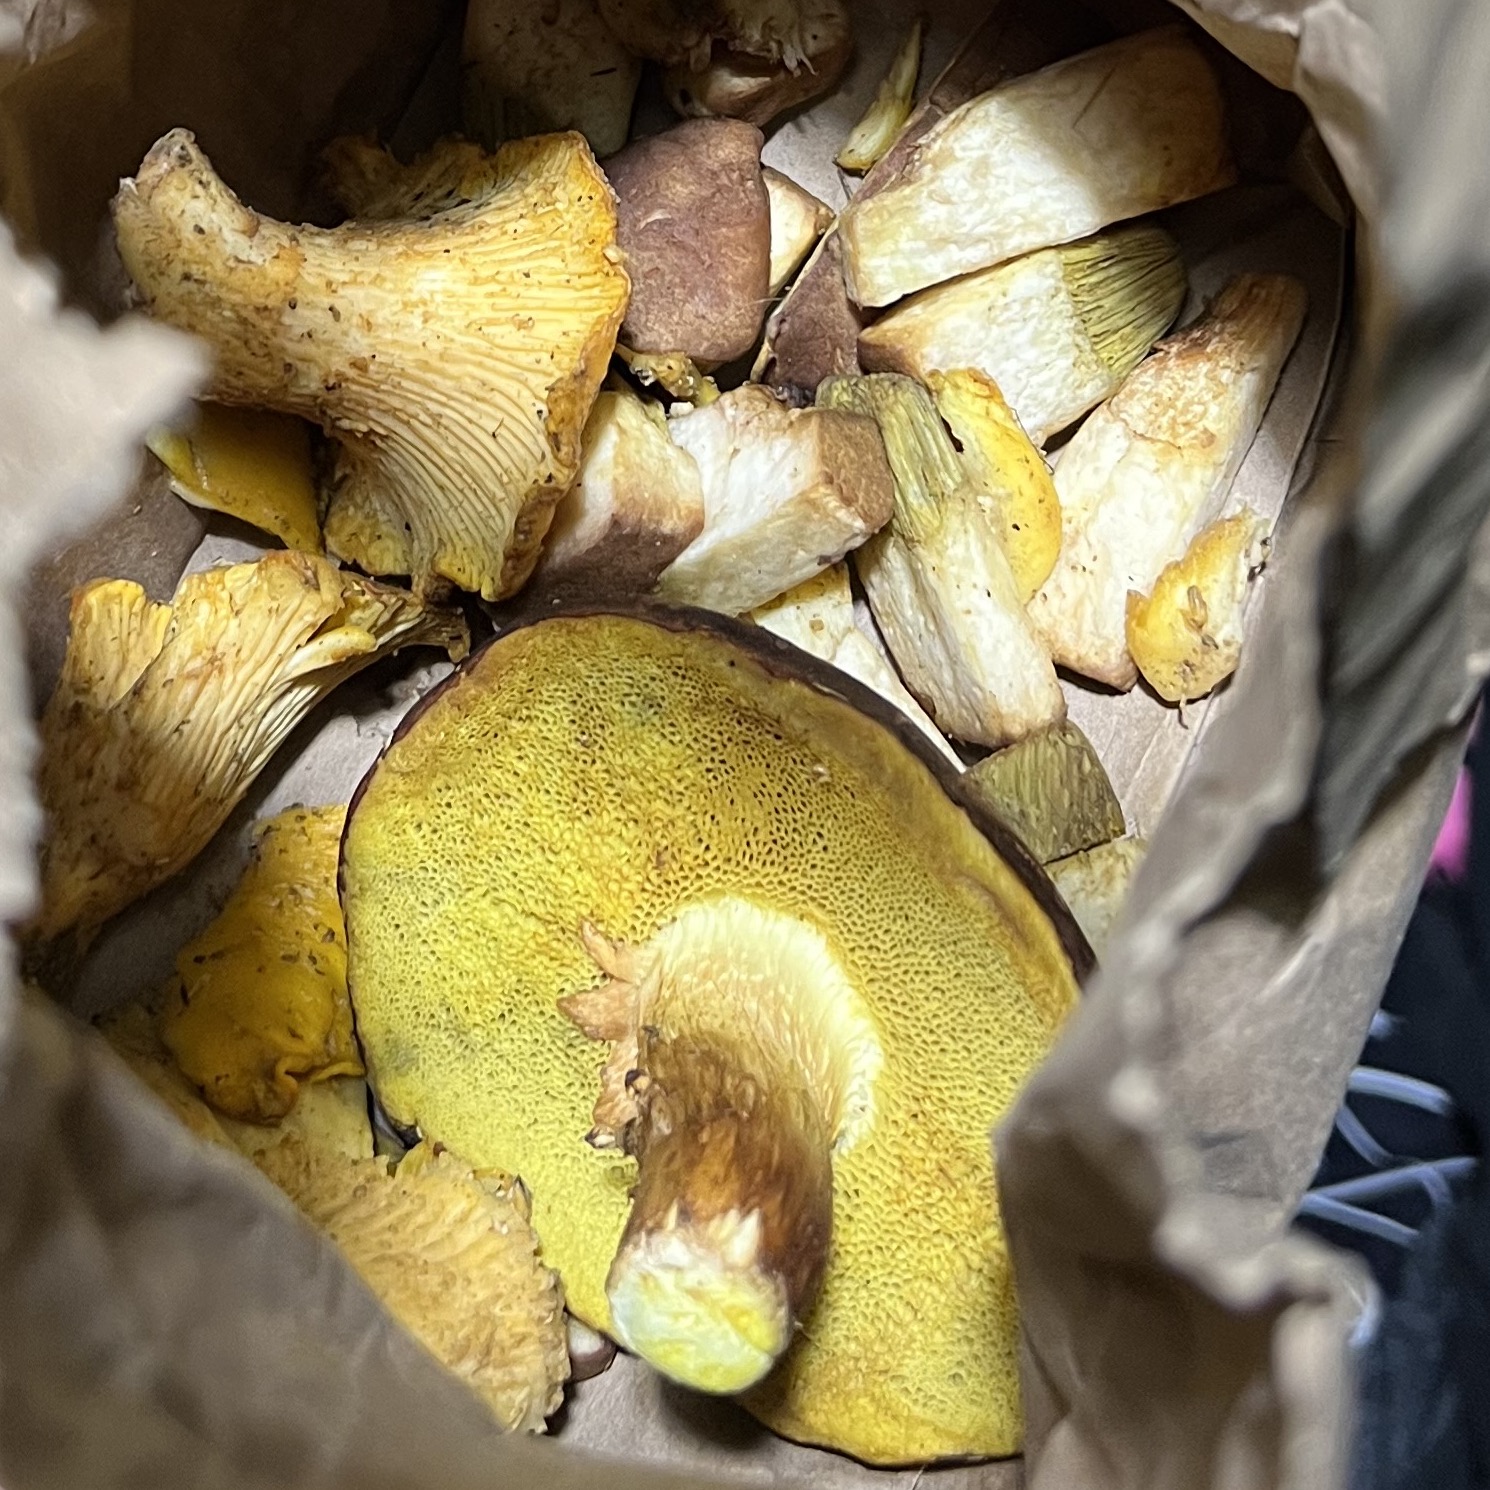 bag full of mushrooms foraged on the redwood coast, including boletes and chanterelles